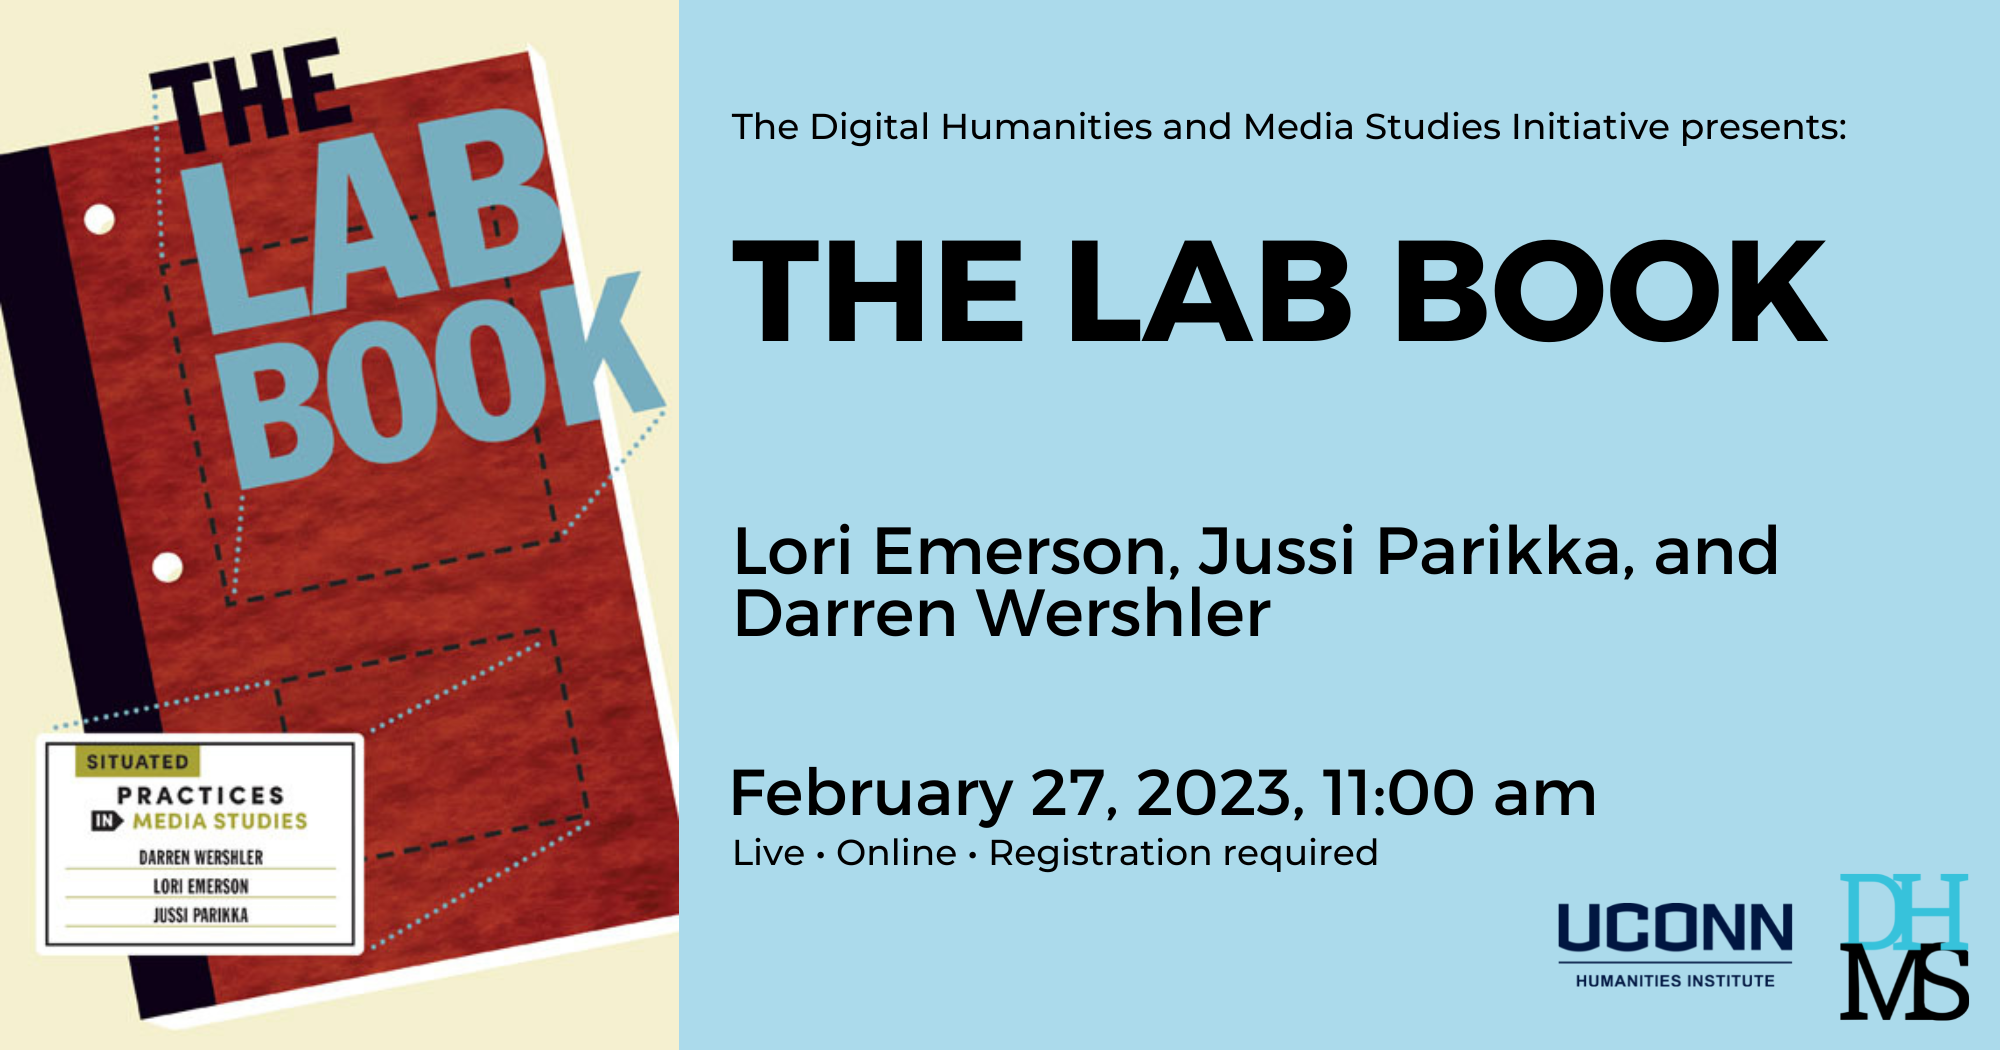 The Digital Humanities and Media Studies Initiative Presents The Lab Book, Lori Emerson, Jussi Parikka, and Darren Wershler. February 27, 2023, 11:00 am. Live. Online. Registration required.